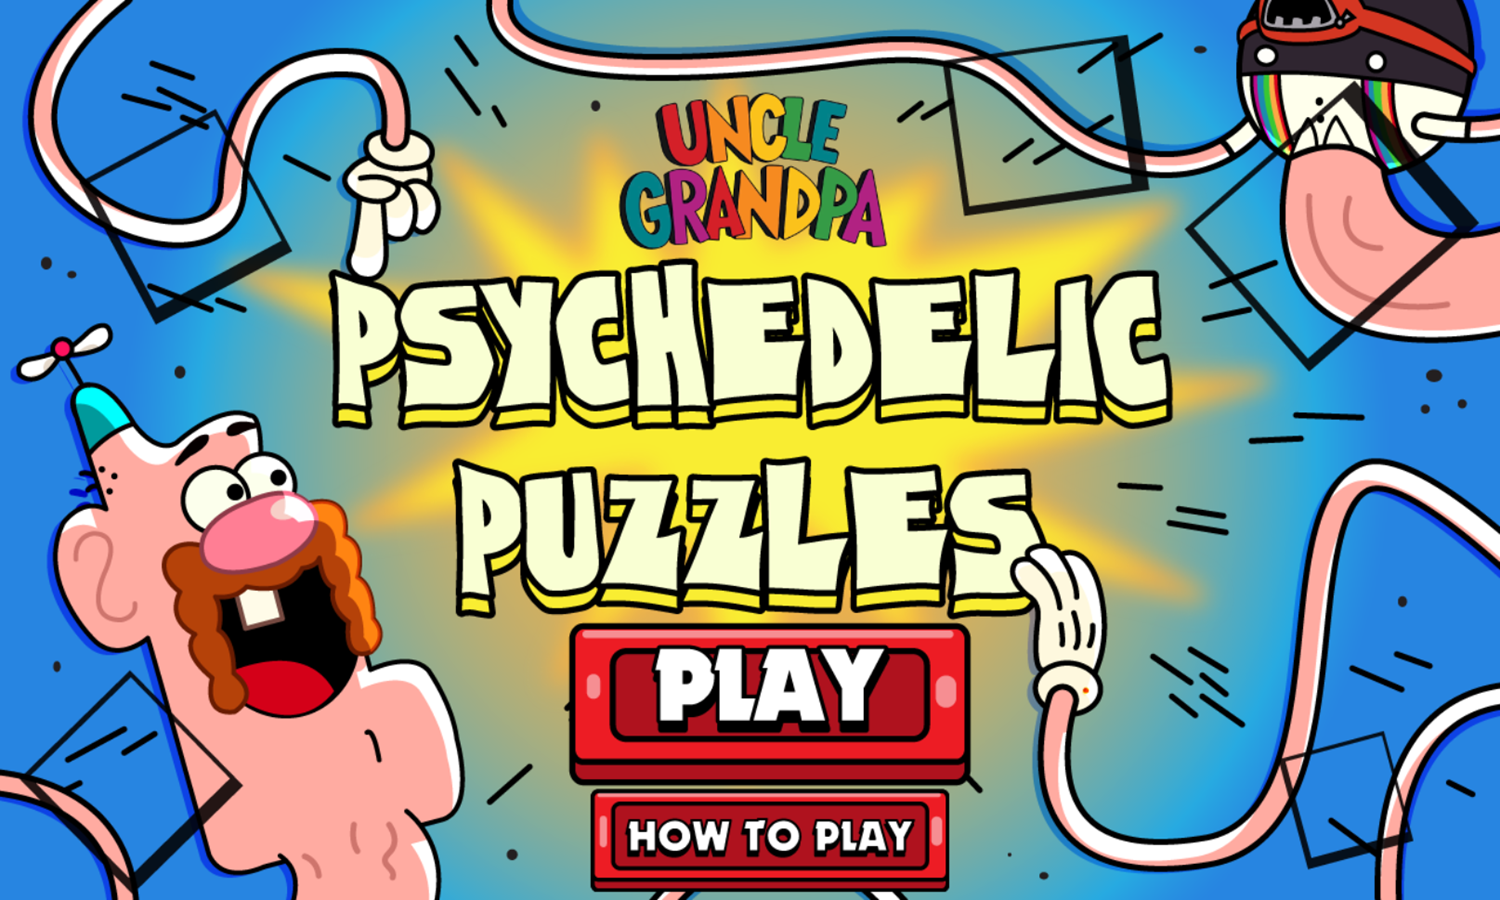 Uncle Grandpa Psychedelic Puzzles Game Welcome Screen Screenshot.